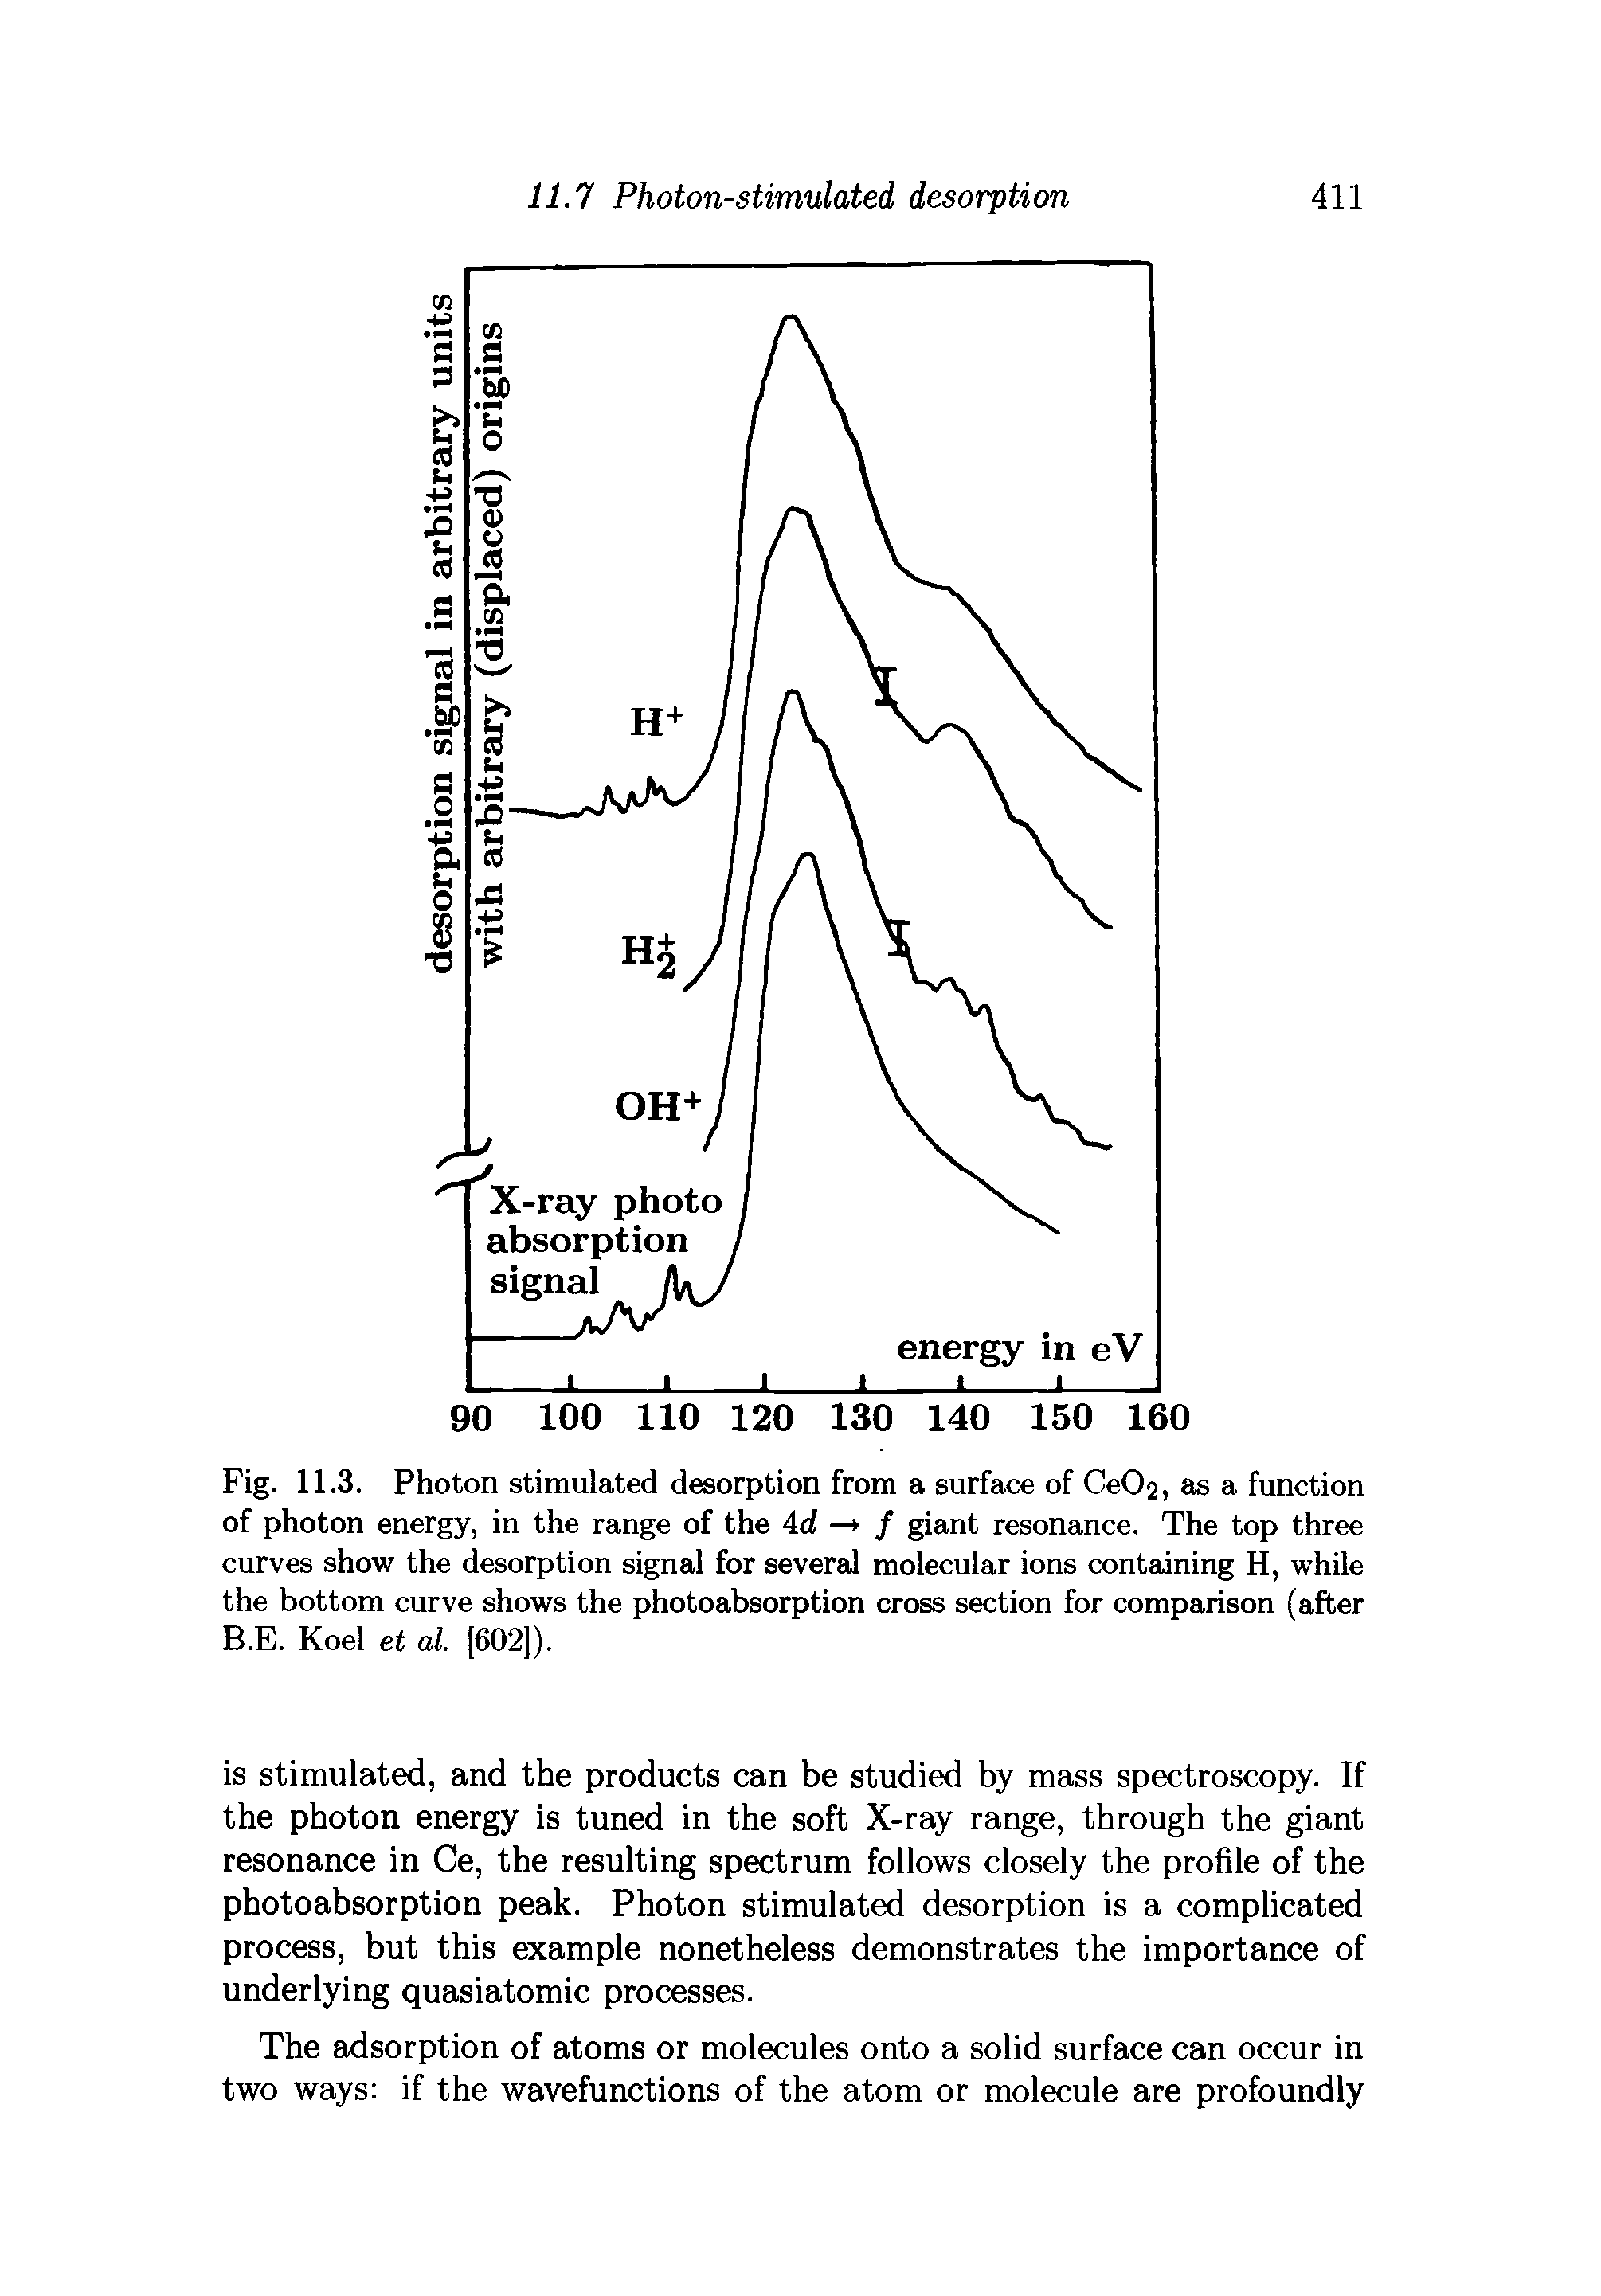 Fig. 11.3. Photon stimulated desorption from a surface of Ce02, as a function of photon energy, in the range of the Ad — / giant resonance. The top three curves show the desorption signal for several molecular ions containing H, while the bottom curve shows the photoabsorption cross section for comparison (after B.E. Koel et at. [602]).